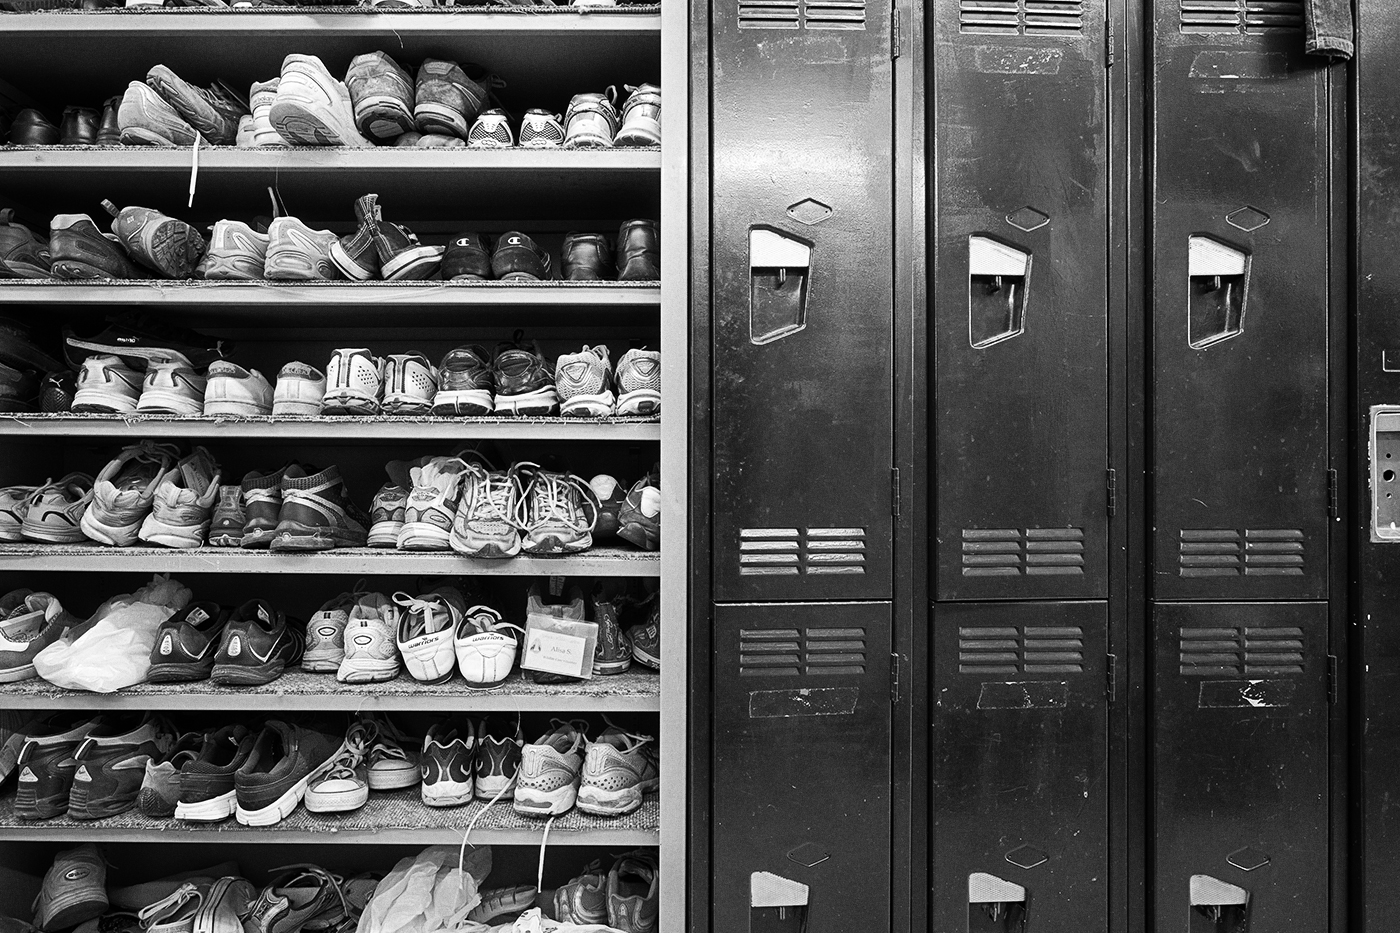 Lockers and racks of shoes at the Toronto Wildlife Centre